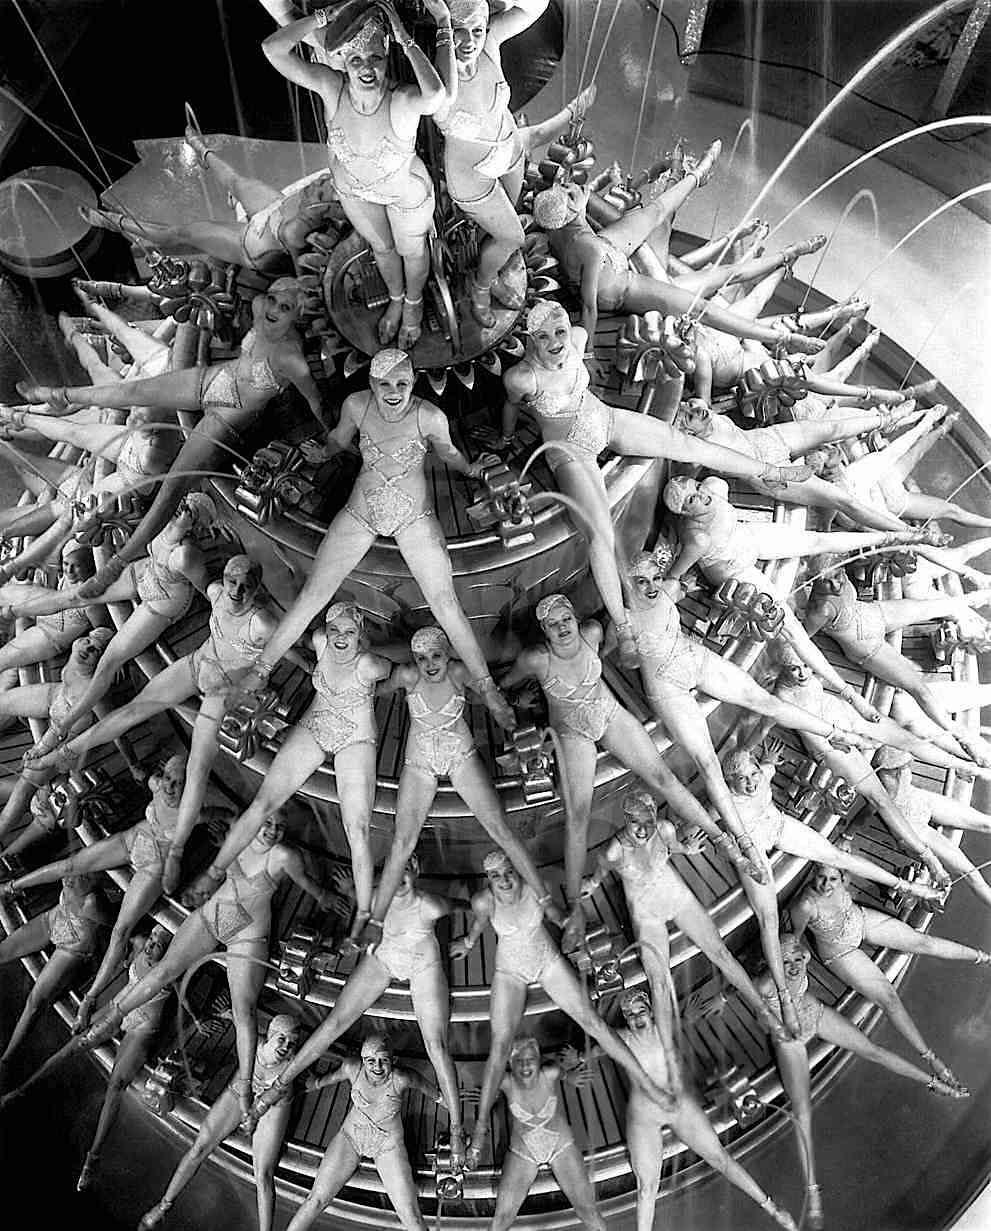 a choreographed Busby Berkeley showgirl fountain for the film 'Footlight Parade' 1933